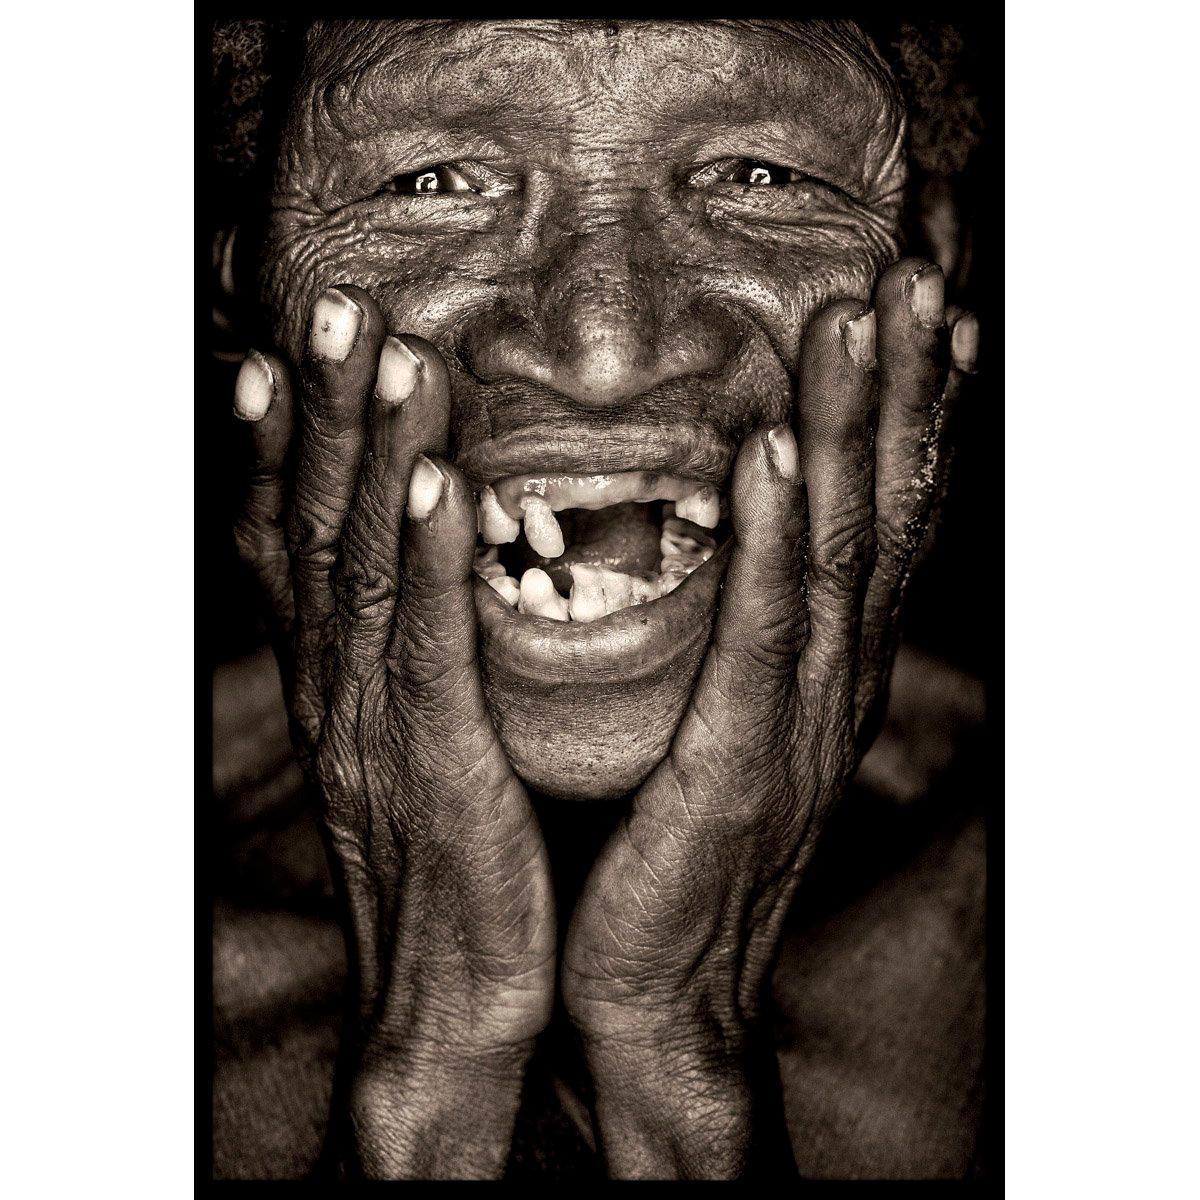 A picture of joy.   KhoiSan bushman from Namibia

John Kenny’s work is all shot on location in some of the remotest corners of Africa. His images are all taken with natural light and his subjects in their day to day attire.

The C-type prints are